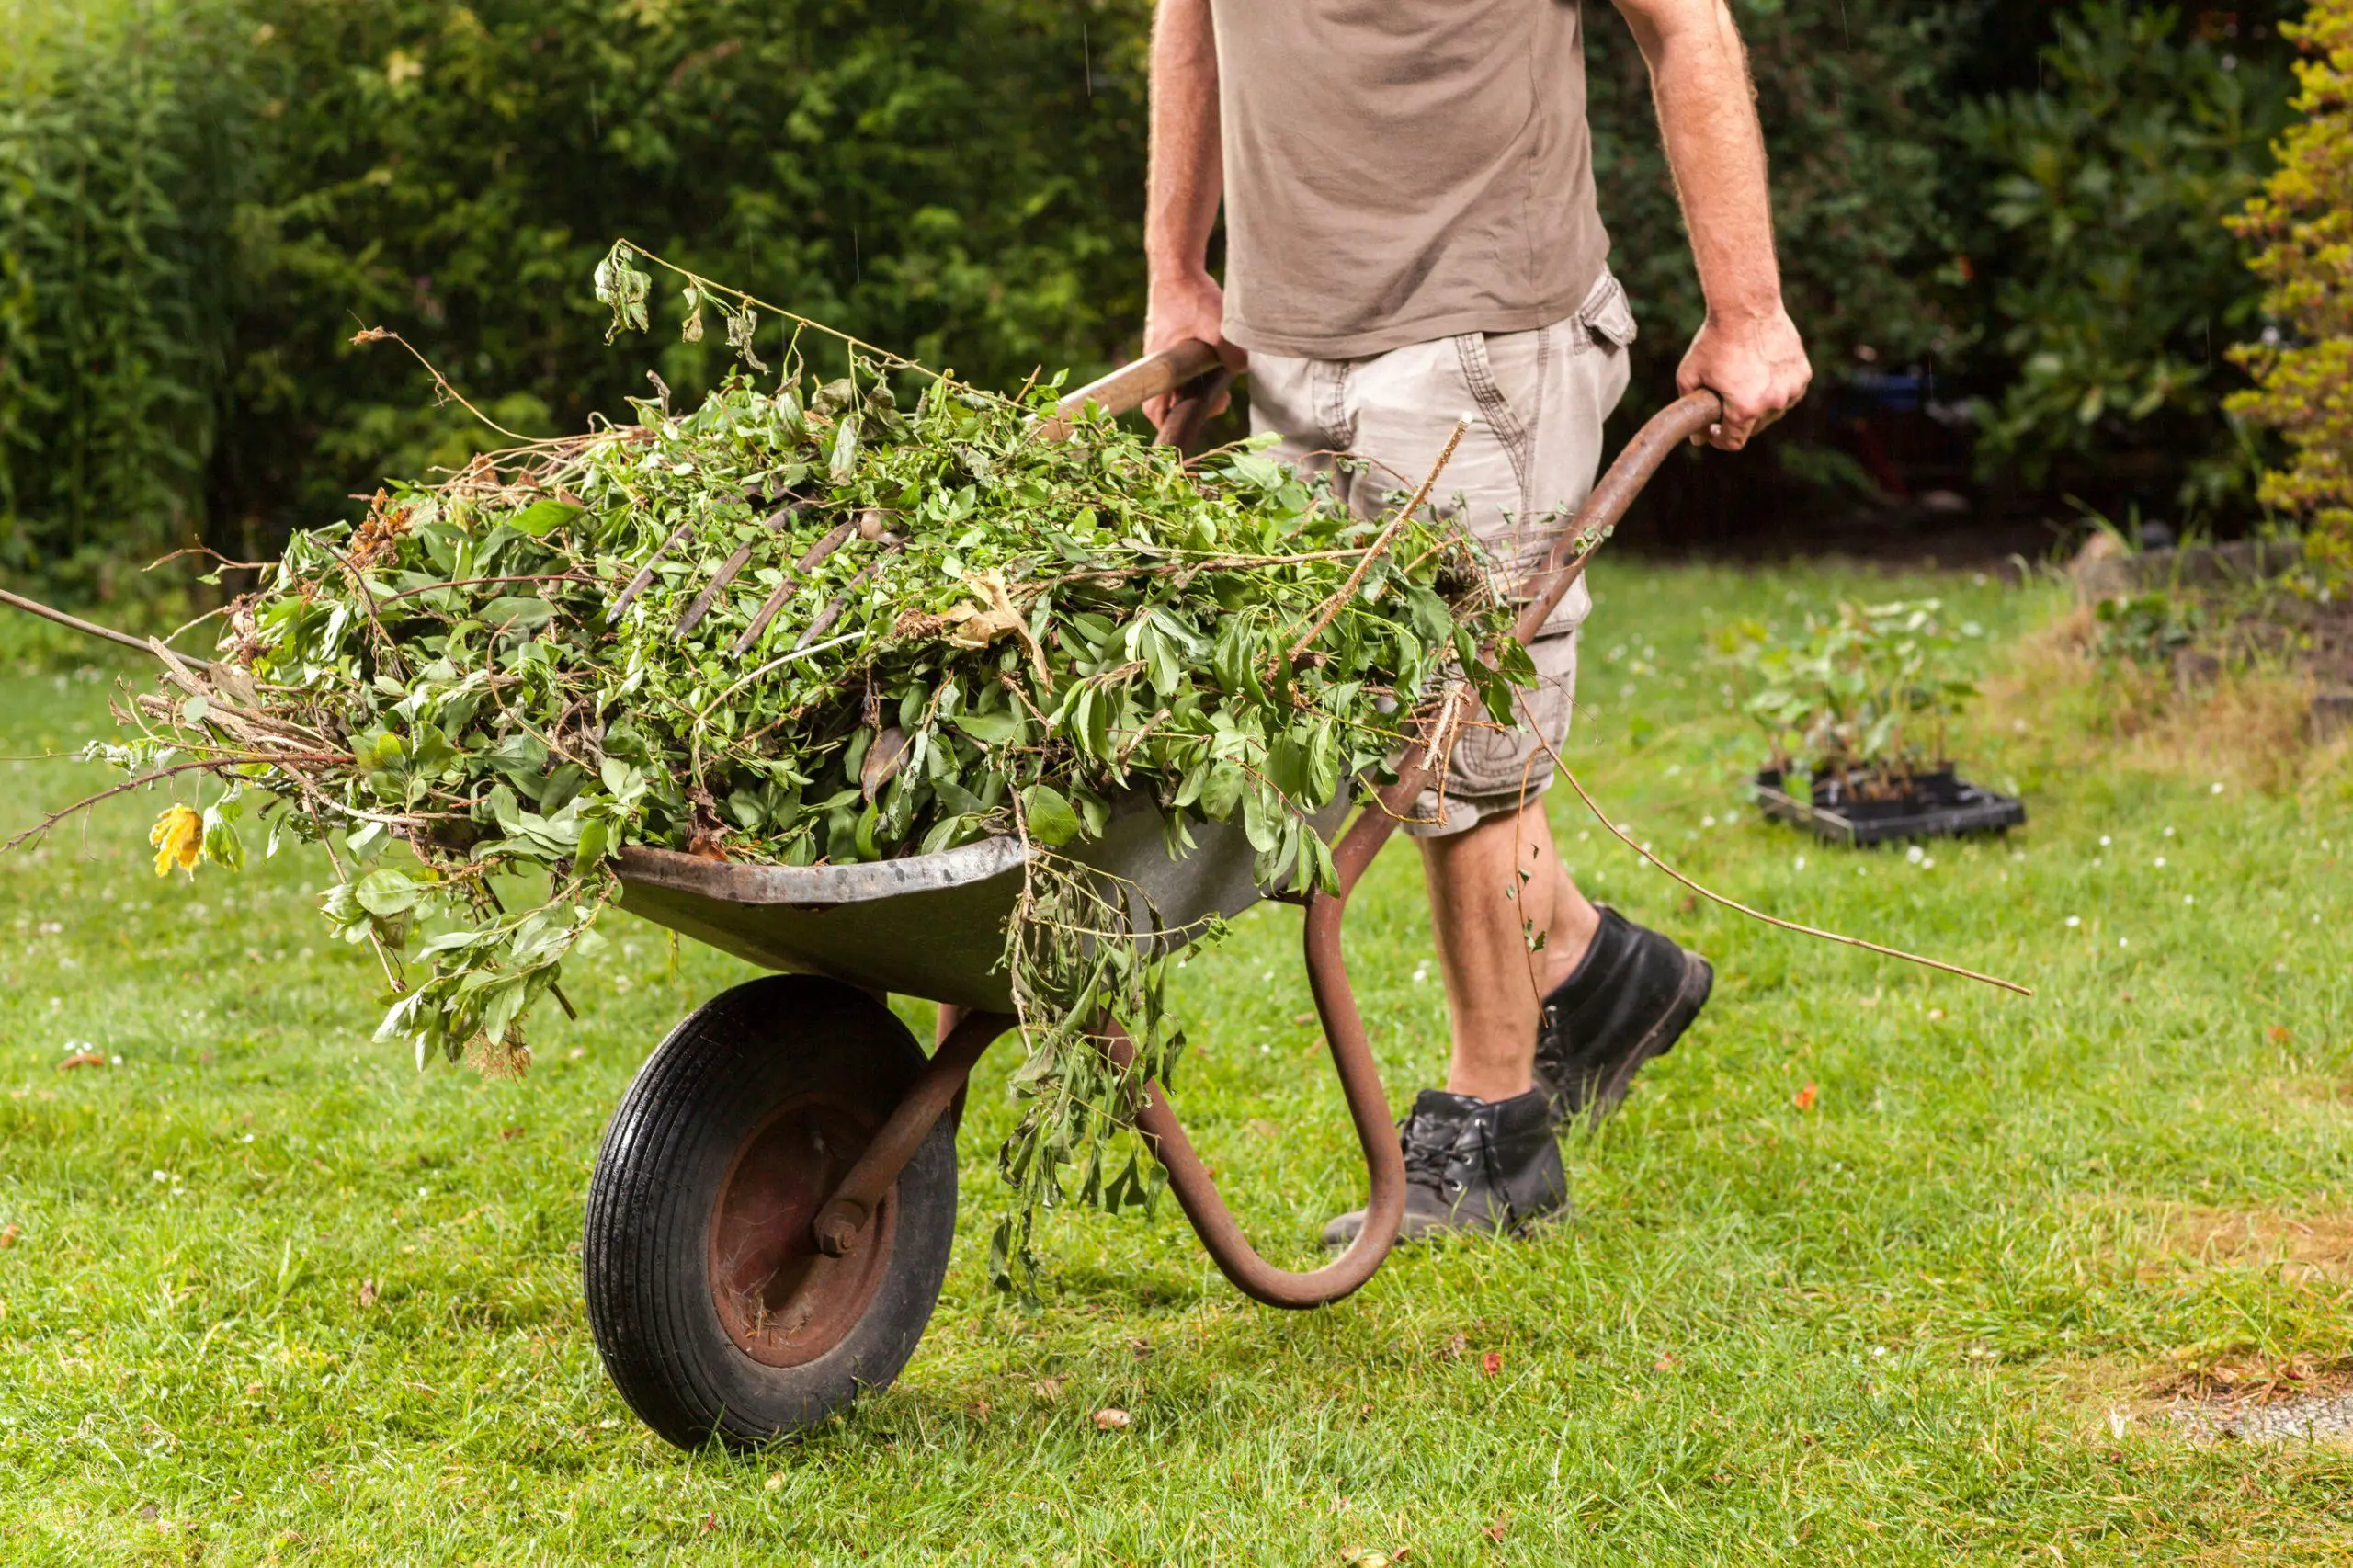 Gardener carrying garden waste via a hand barrow to recycle the waste within a compost heap